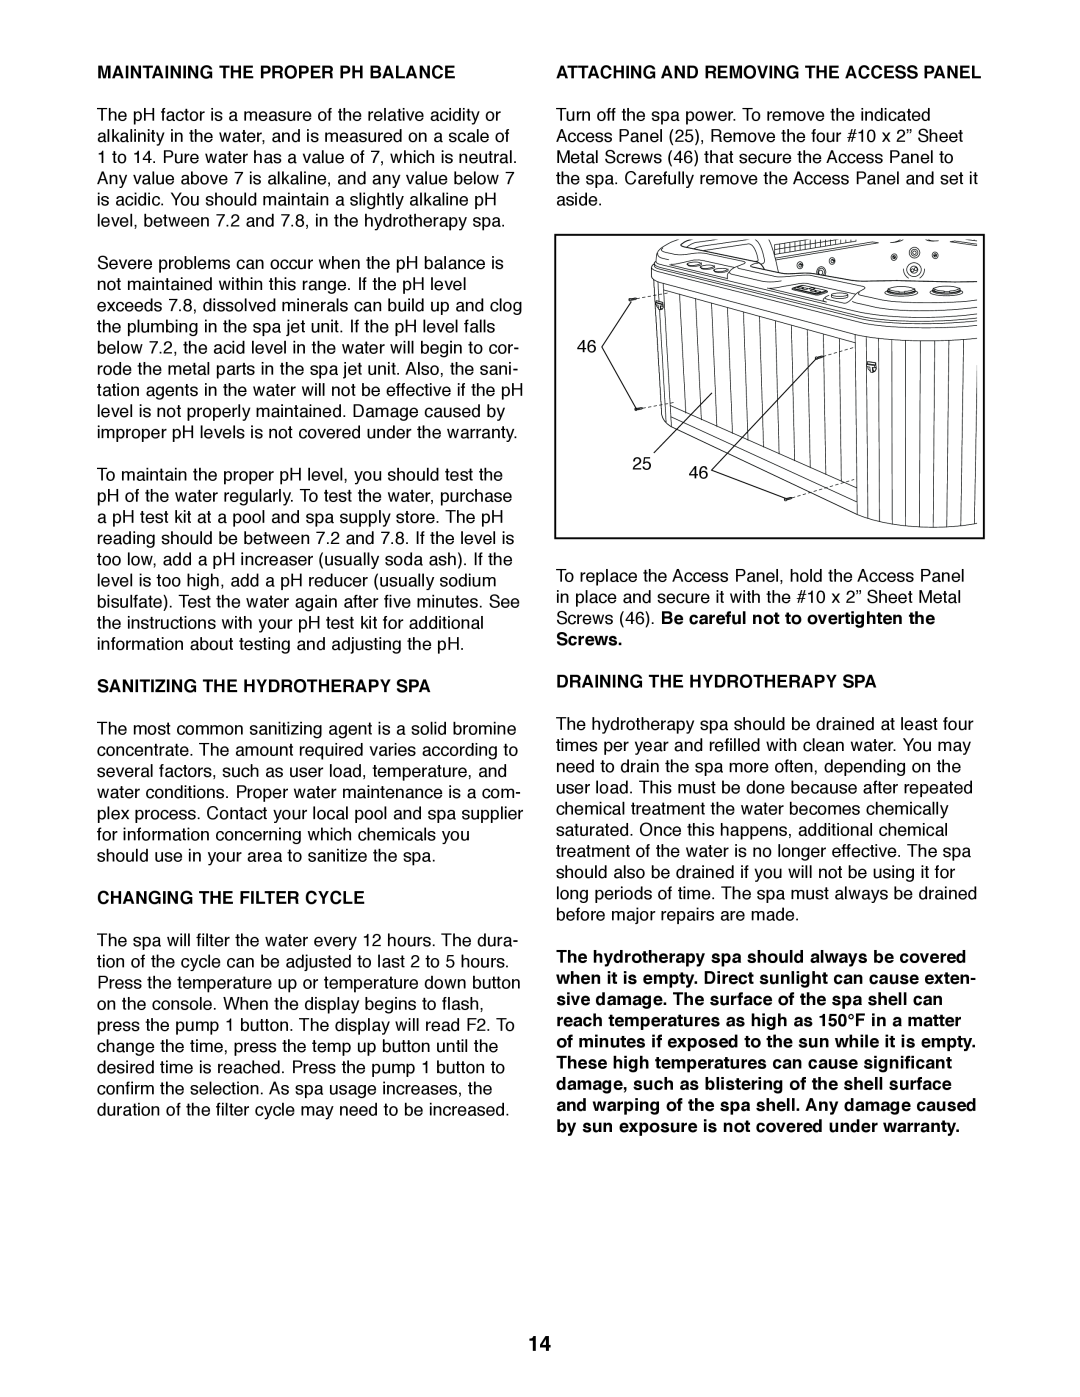 Image IMSW73910 user manual Maintaining The Proper Ph Balance, Sanitizing The Hydrotherapy Spa, Changing The Filter Cycle 